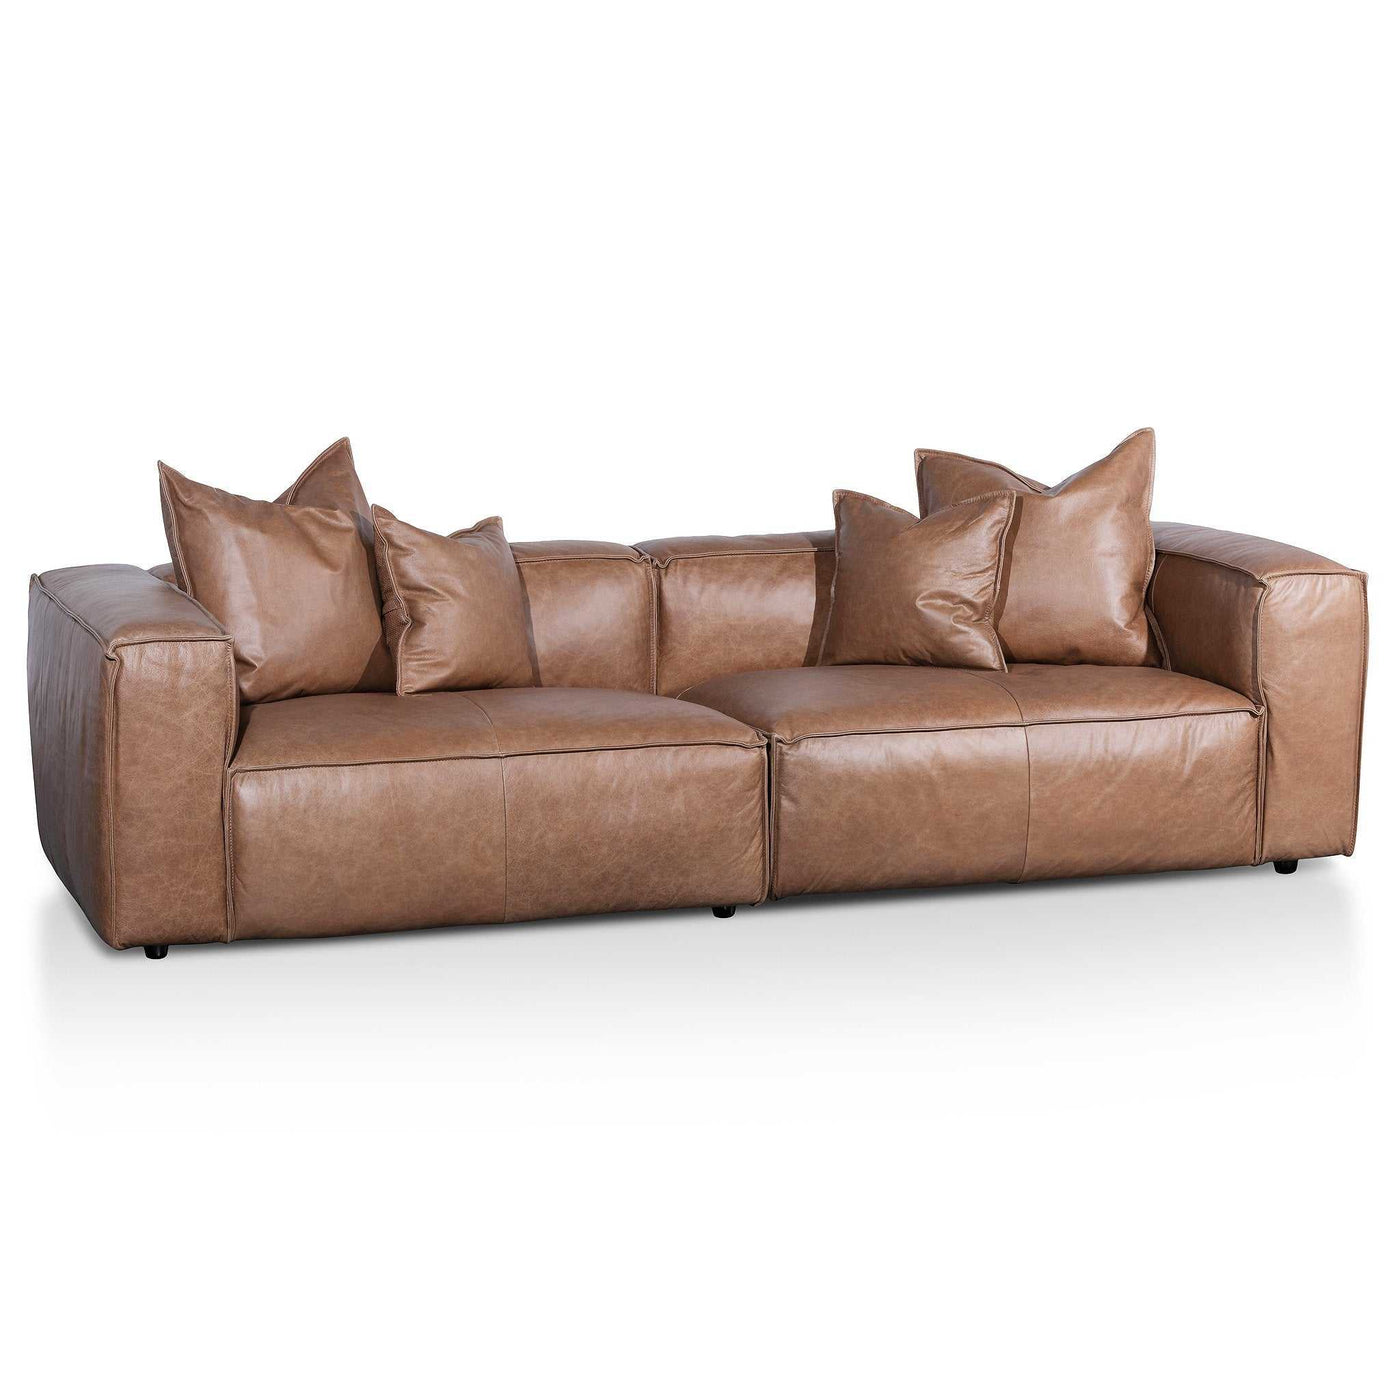 3 Seater Sofa with Cushion and Pillow - Saddle Brown